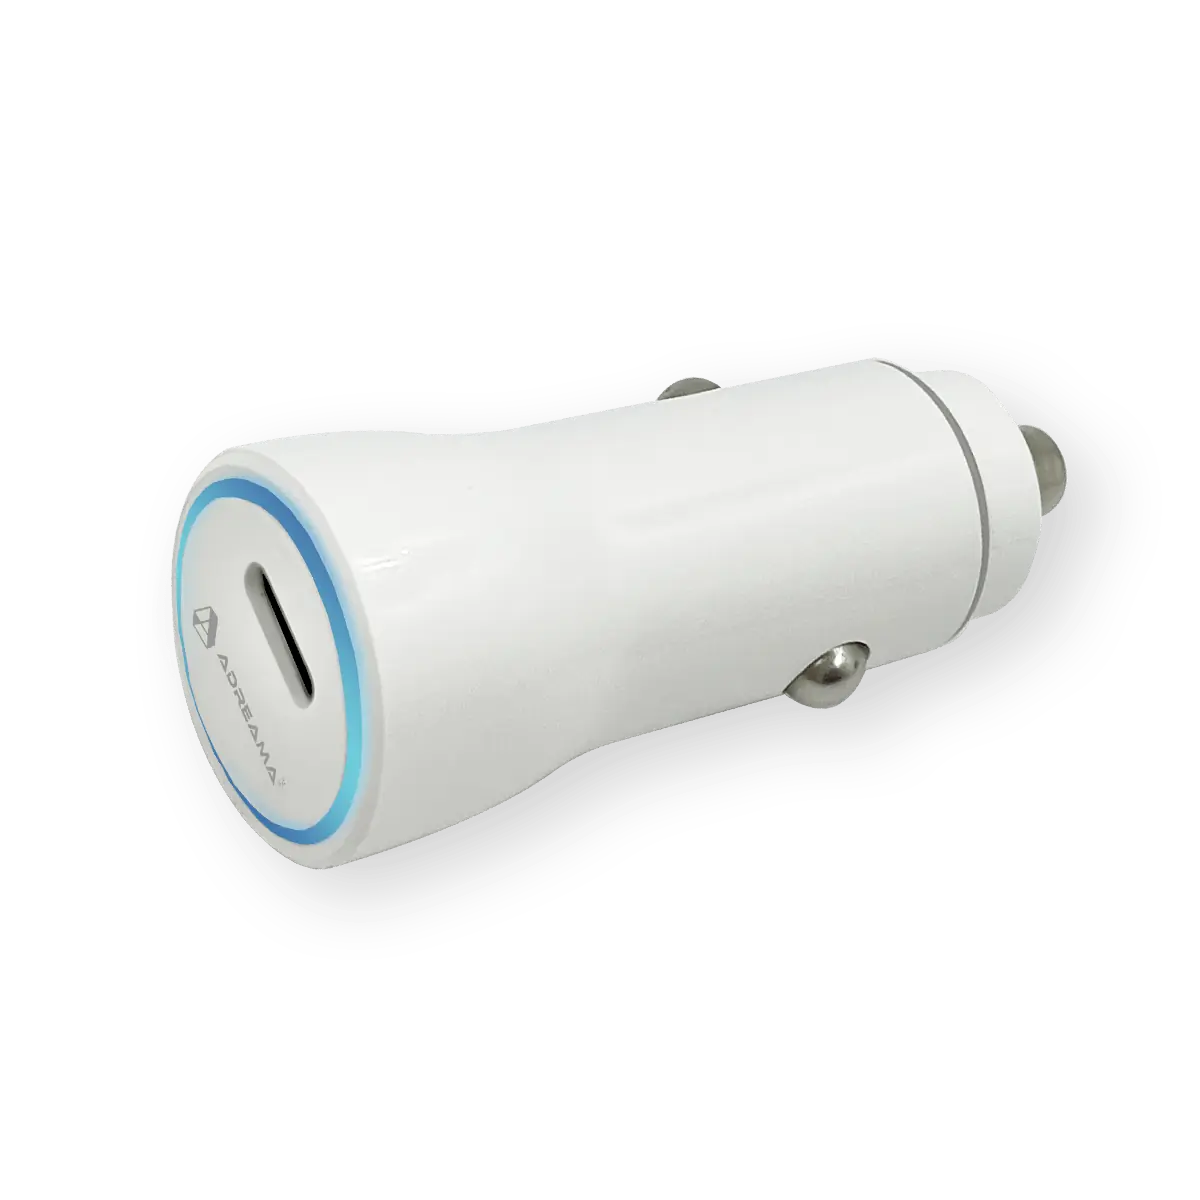 Maximize Your Car Charging Speed with the Adreama PD 20W Car Charger